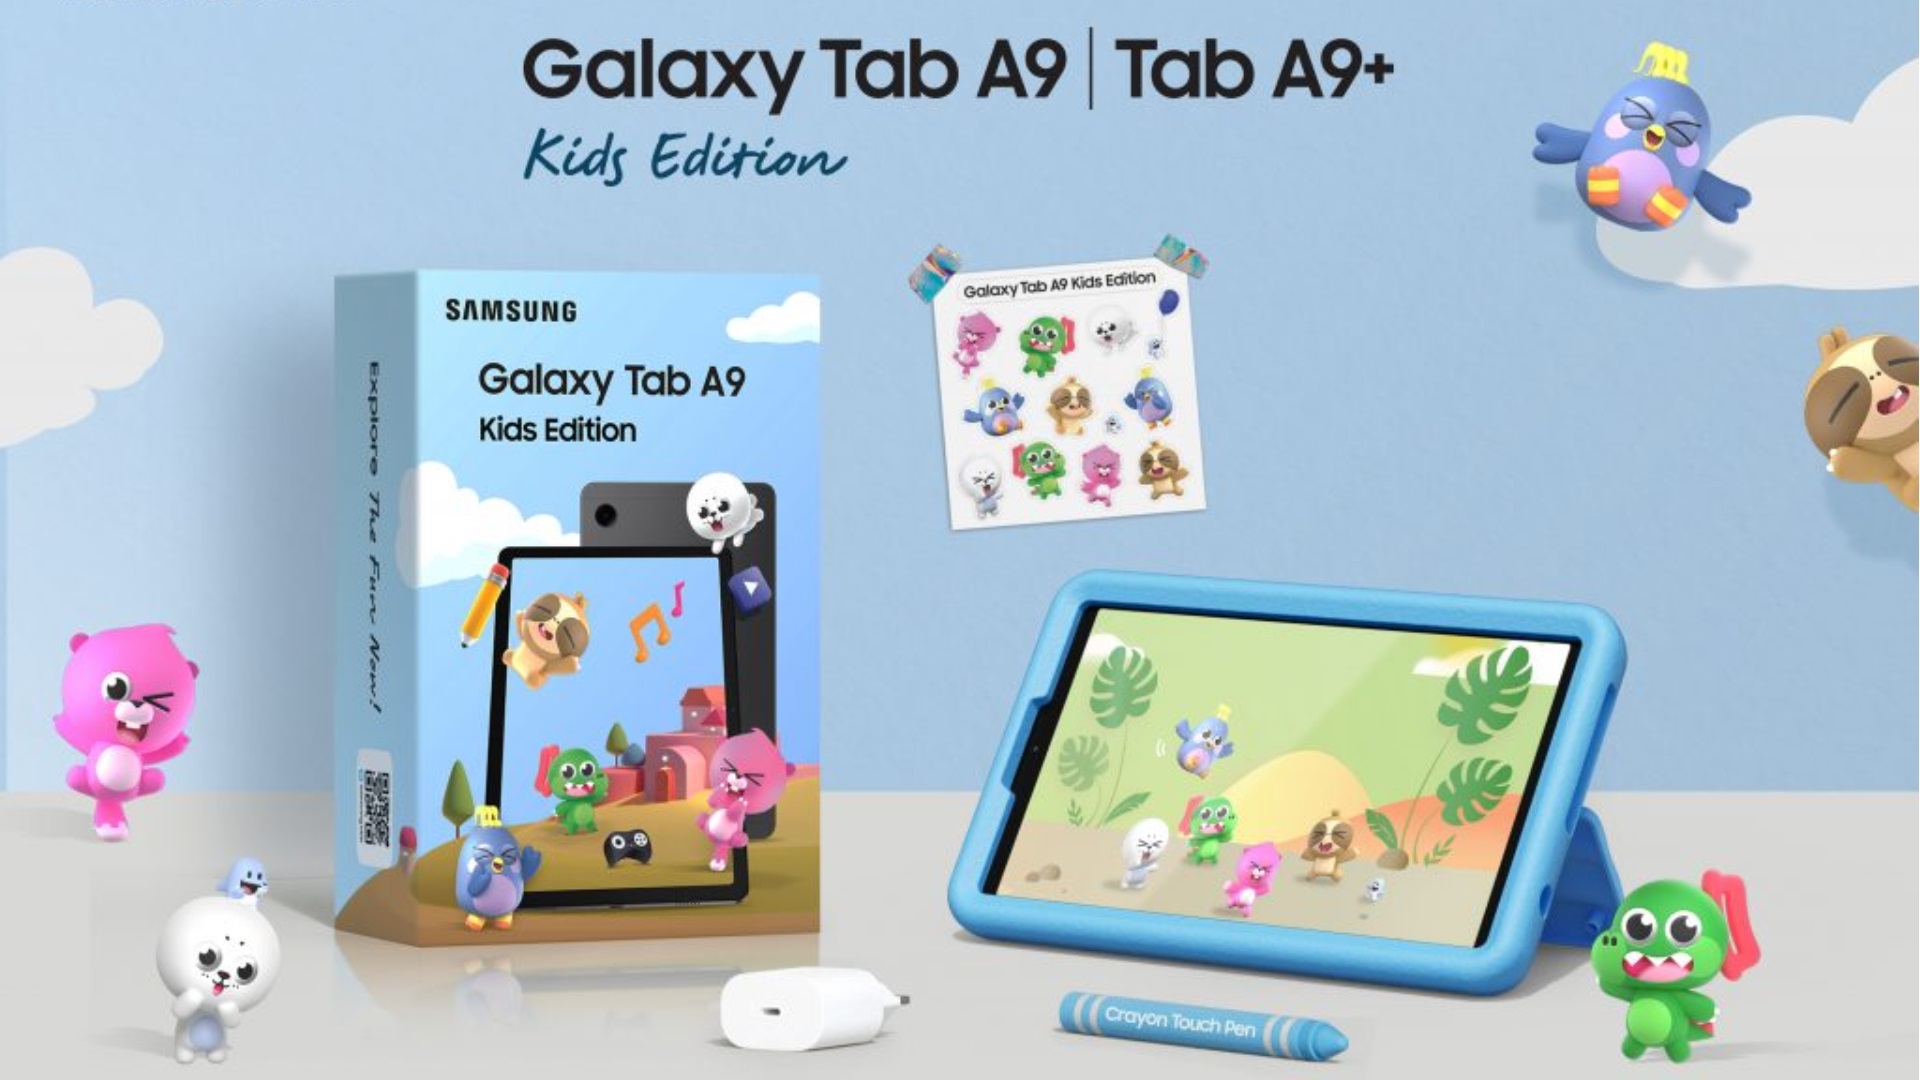 Buy now Galaxy Tab A9 & A9 Plus, Price & Deals